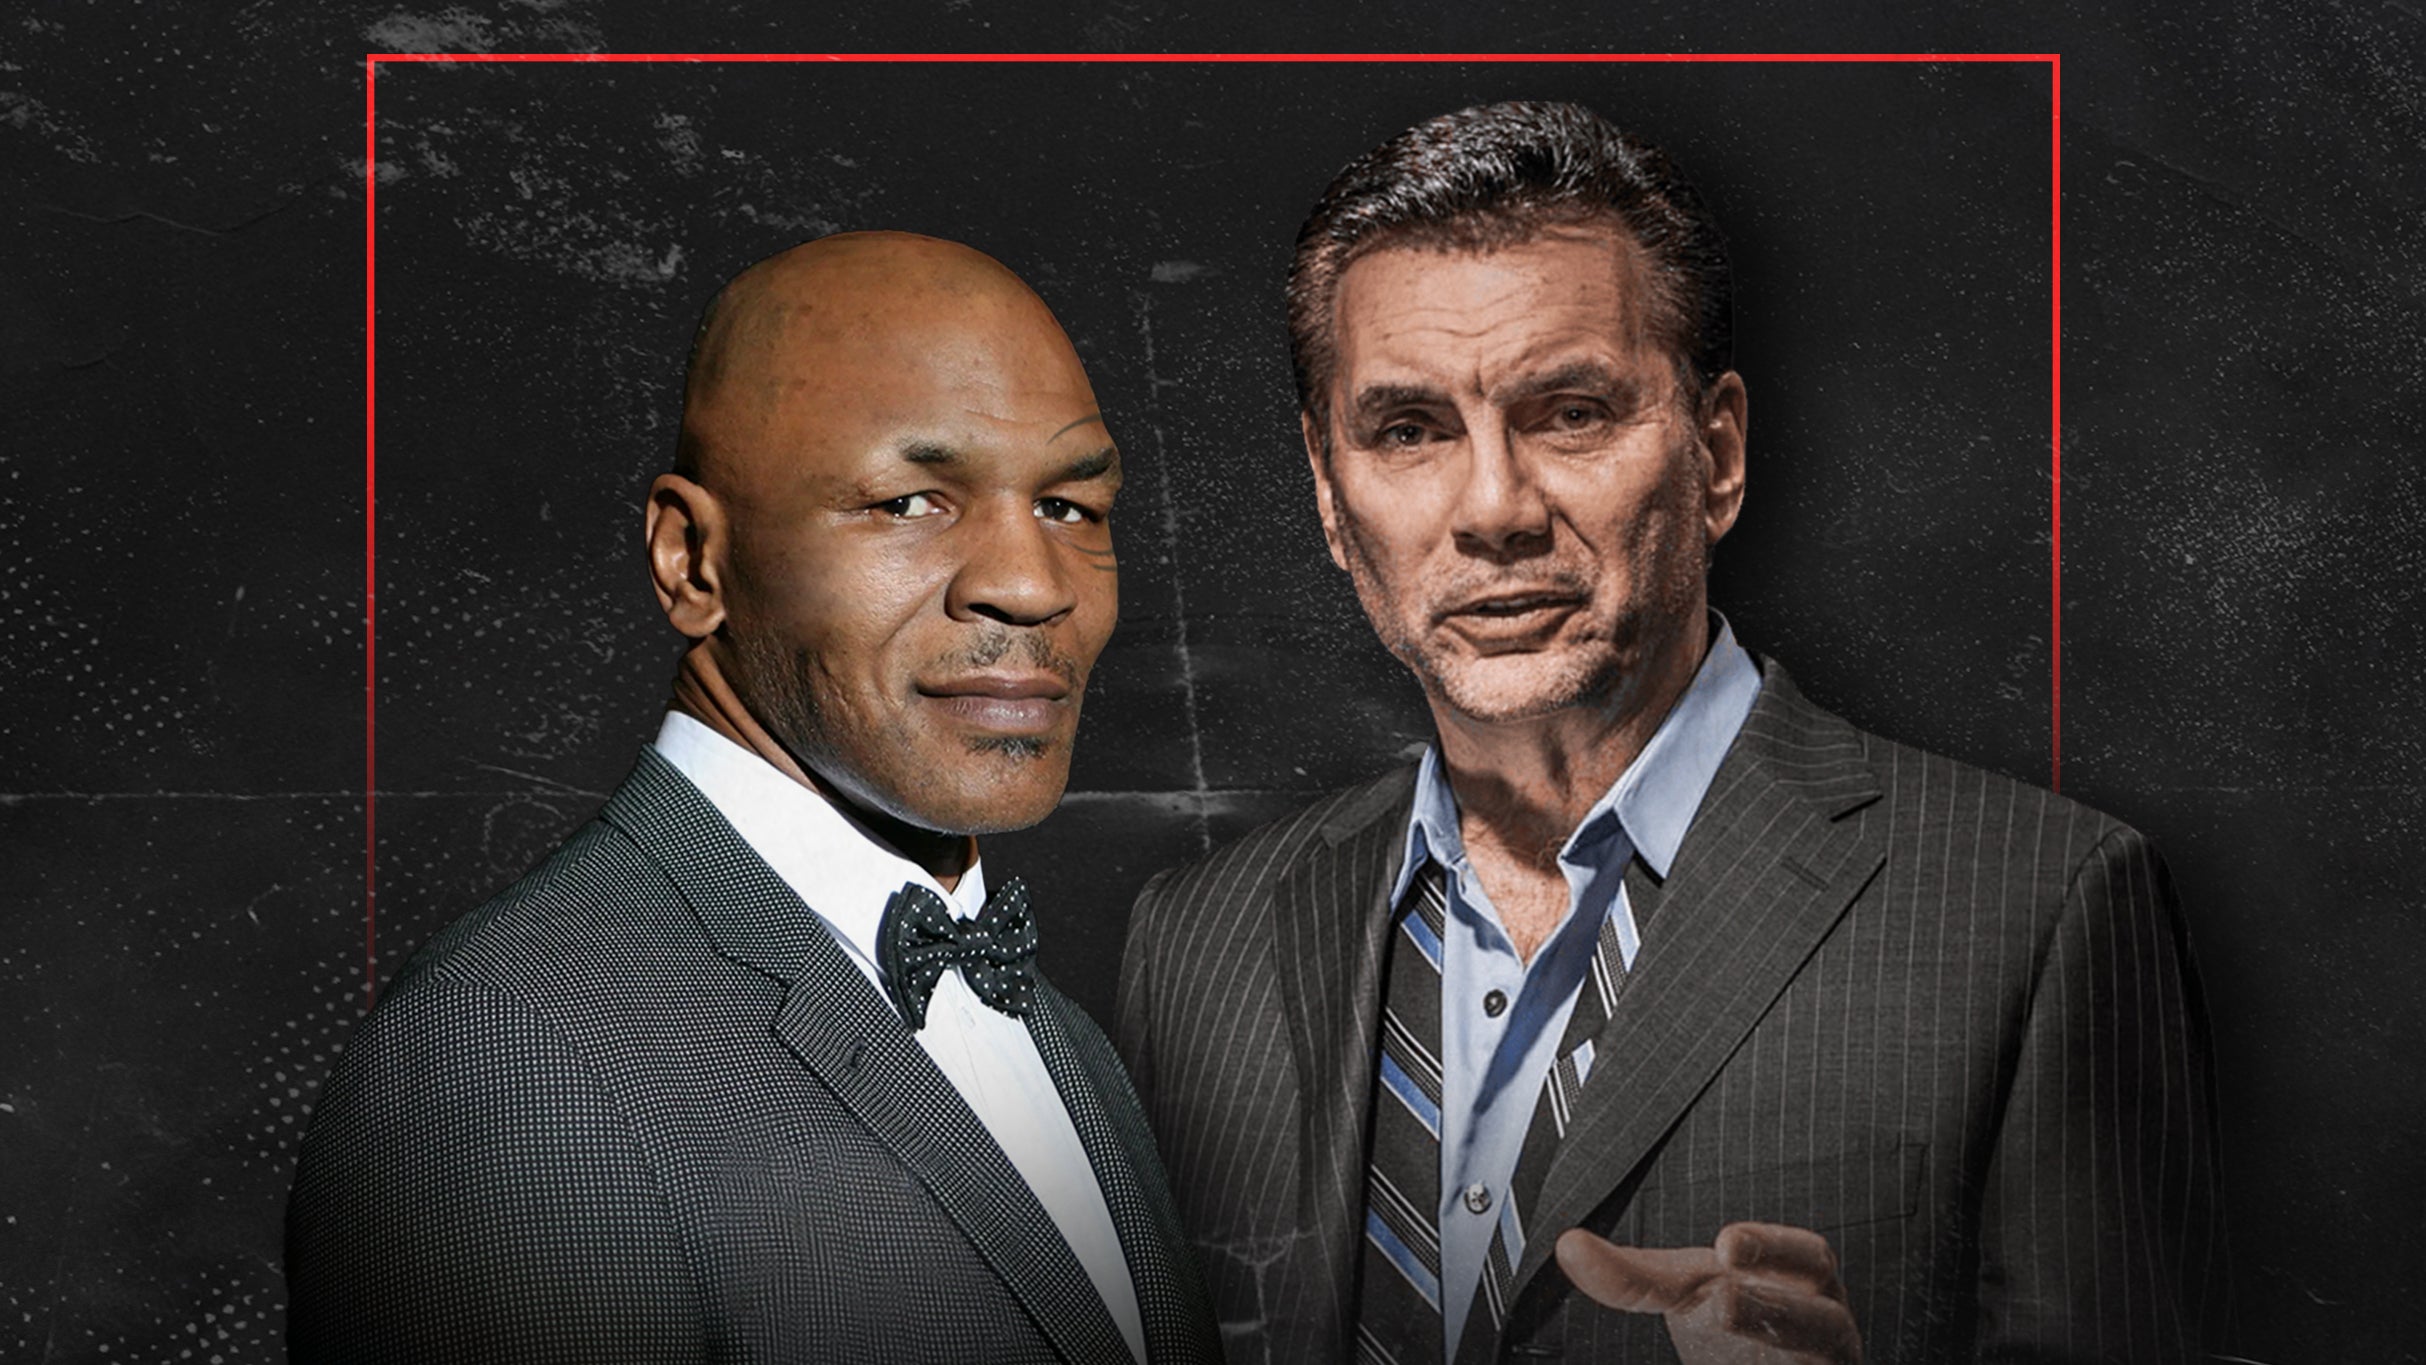 Remade Men: Mike Tyson & Michael Franzese. Hosted by Chazz Palminteri. pre-sale password for approved tickets in New York